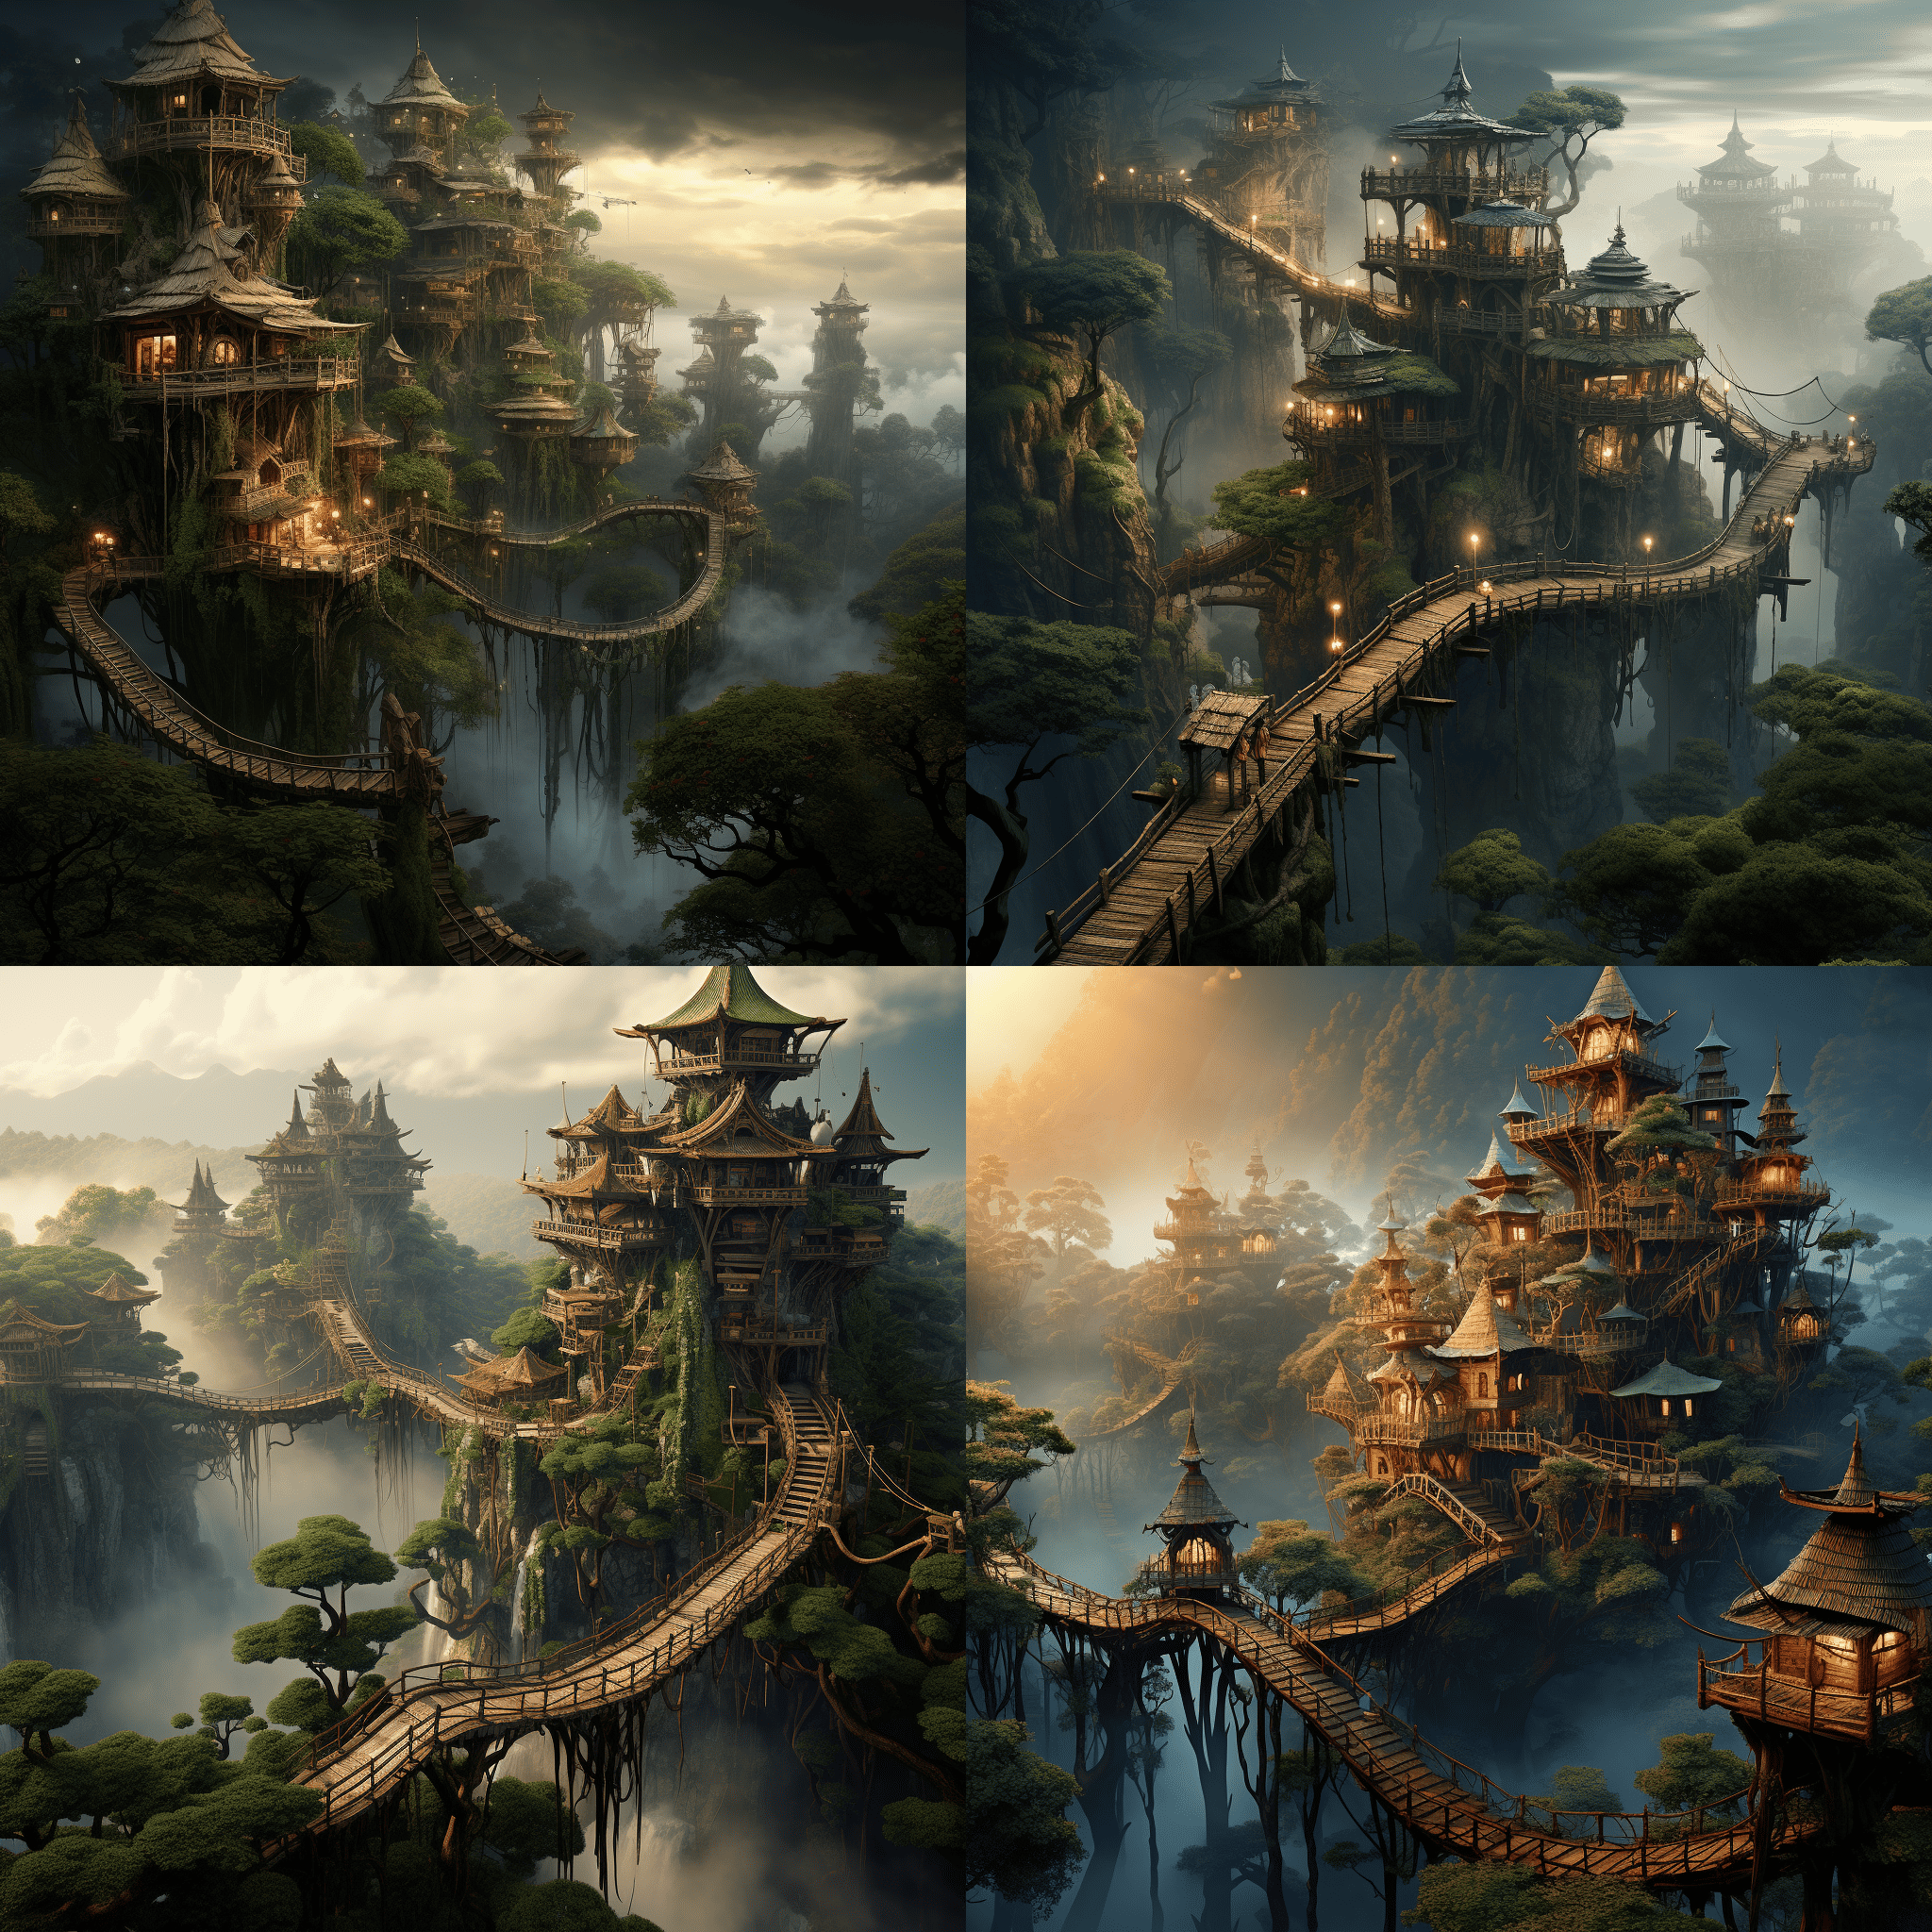 A treehouse village interconnected with wooden bridges, perched atop ancient giant trees amidst a misty forest